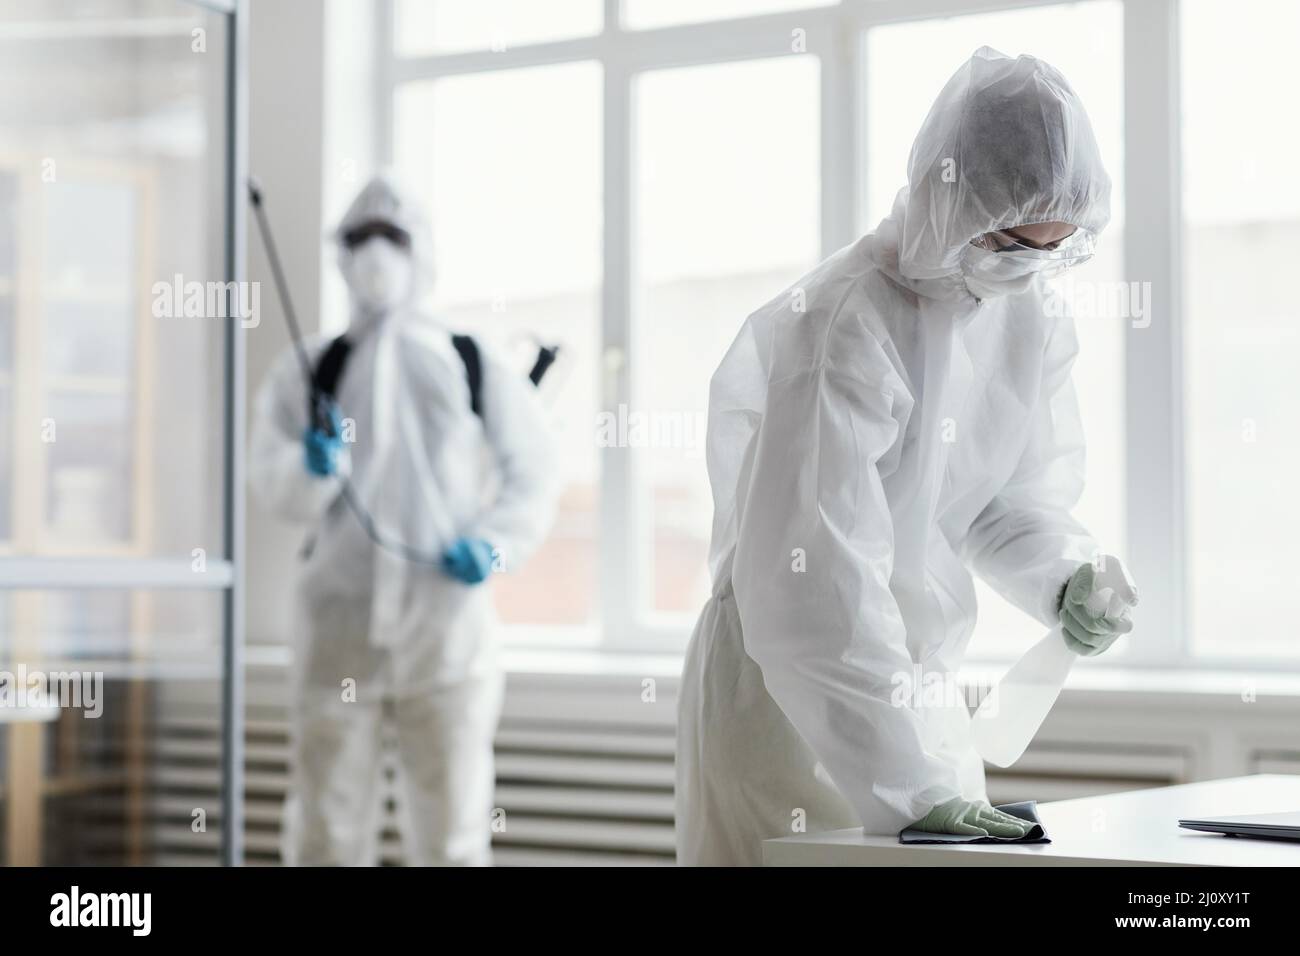 People protective equipment disinfecting. High quality photo Stock Photo